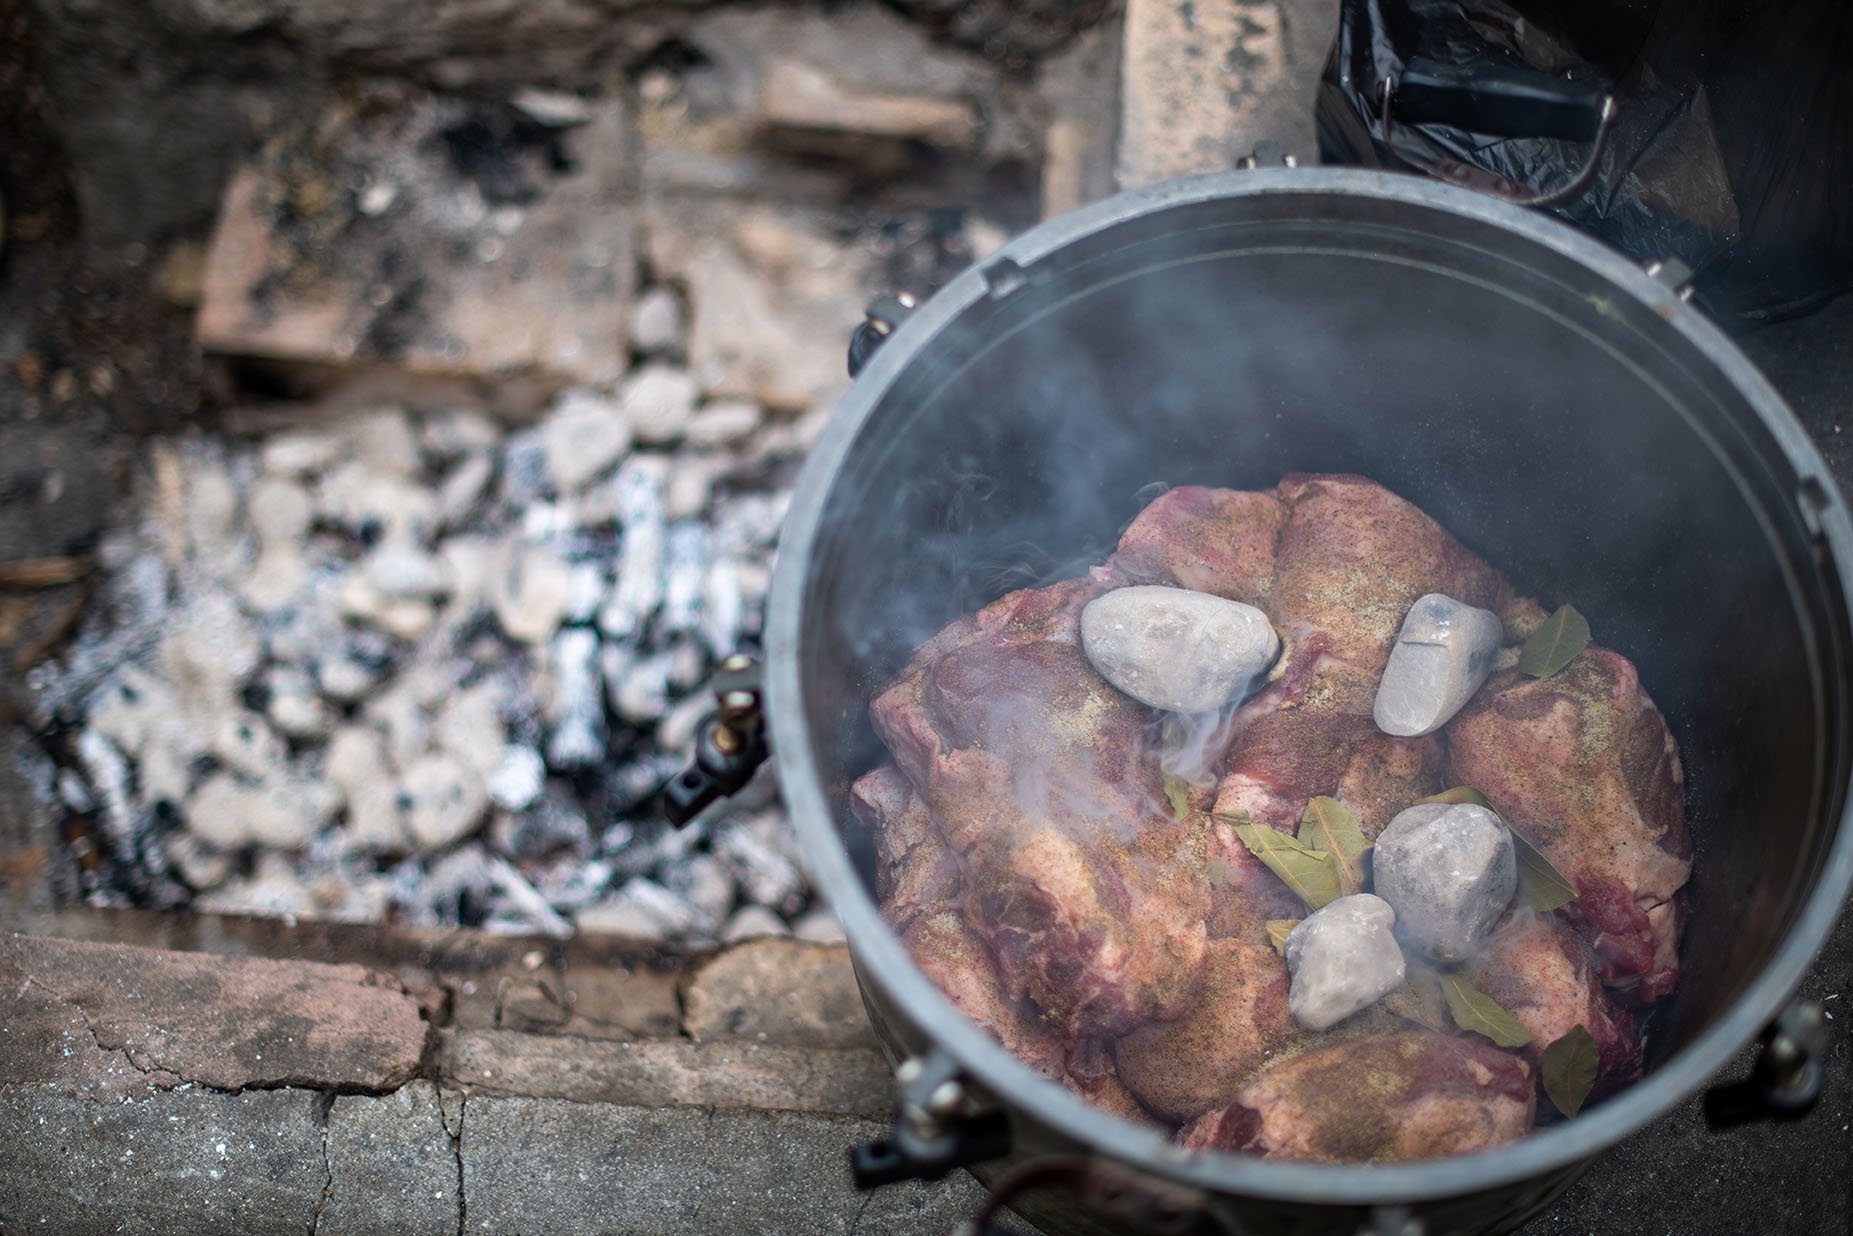 Overhead view of a pot filled with chunks of raw meat and rocks with wisps of smoke rising up.